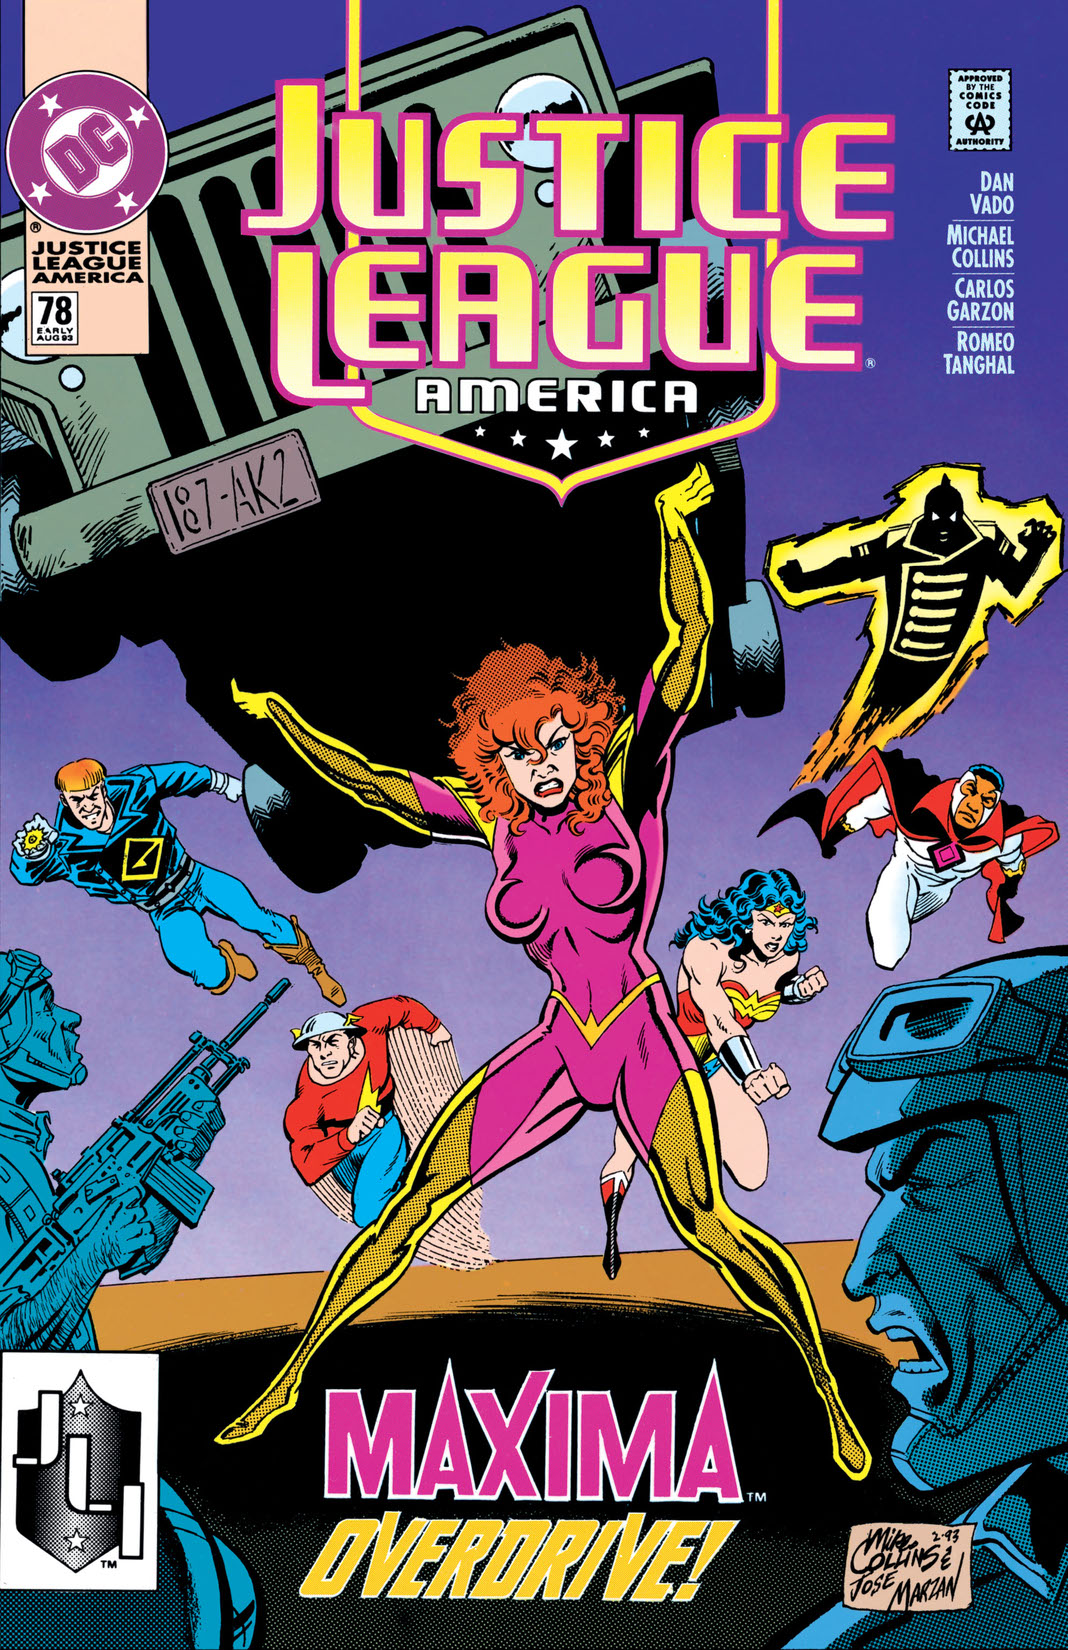 Justice League America (1987-) #78 preview images